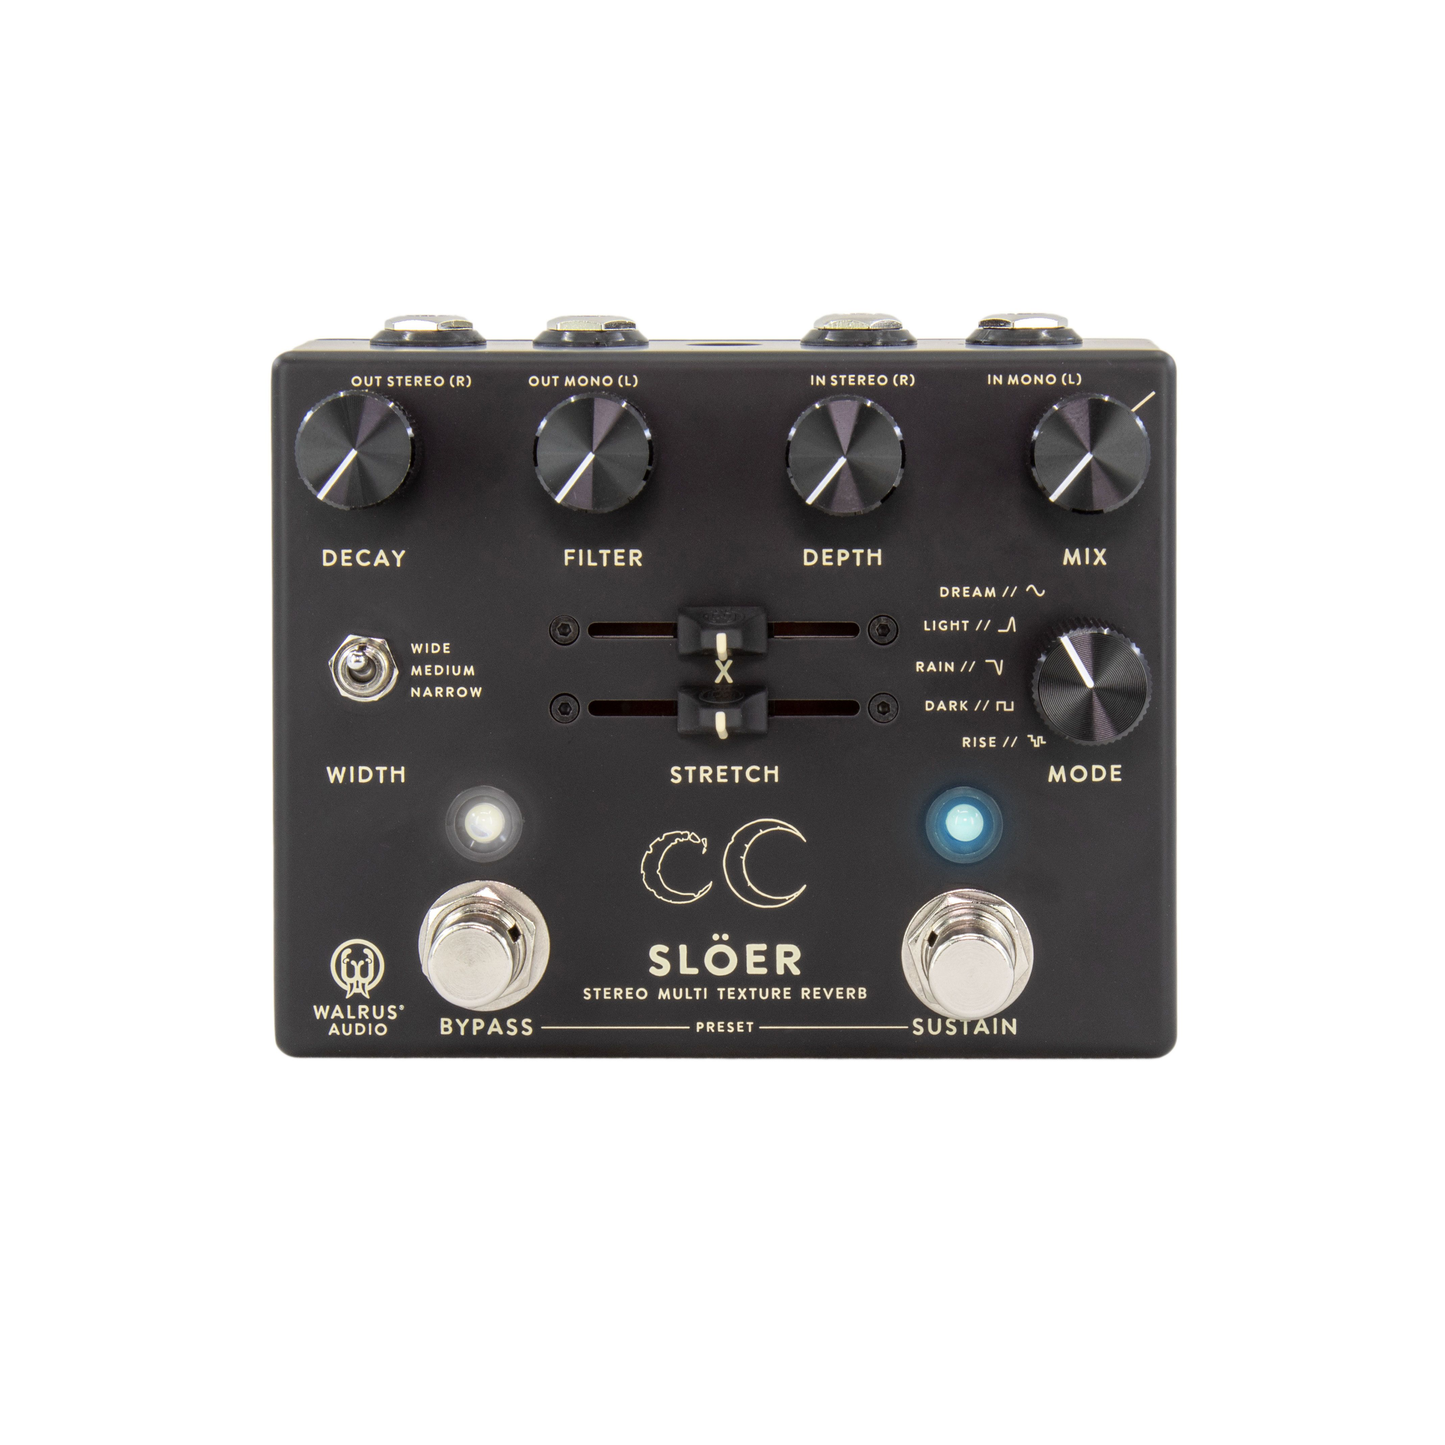 Slöer Stereo Ambient Reverb